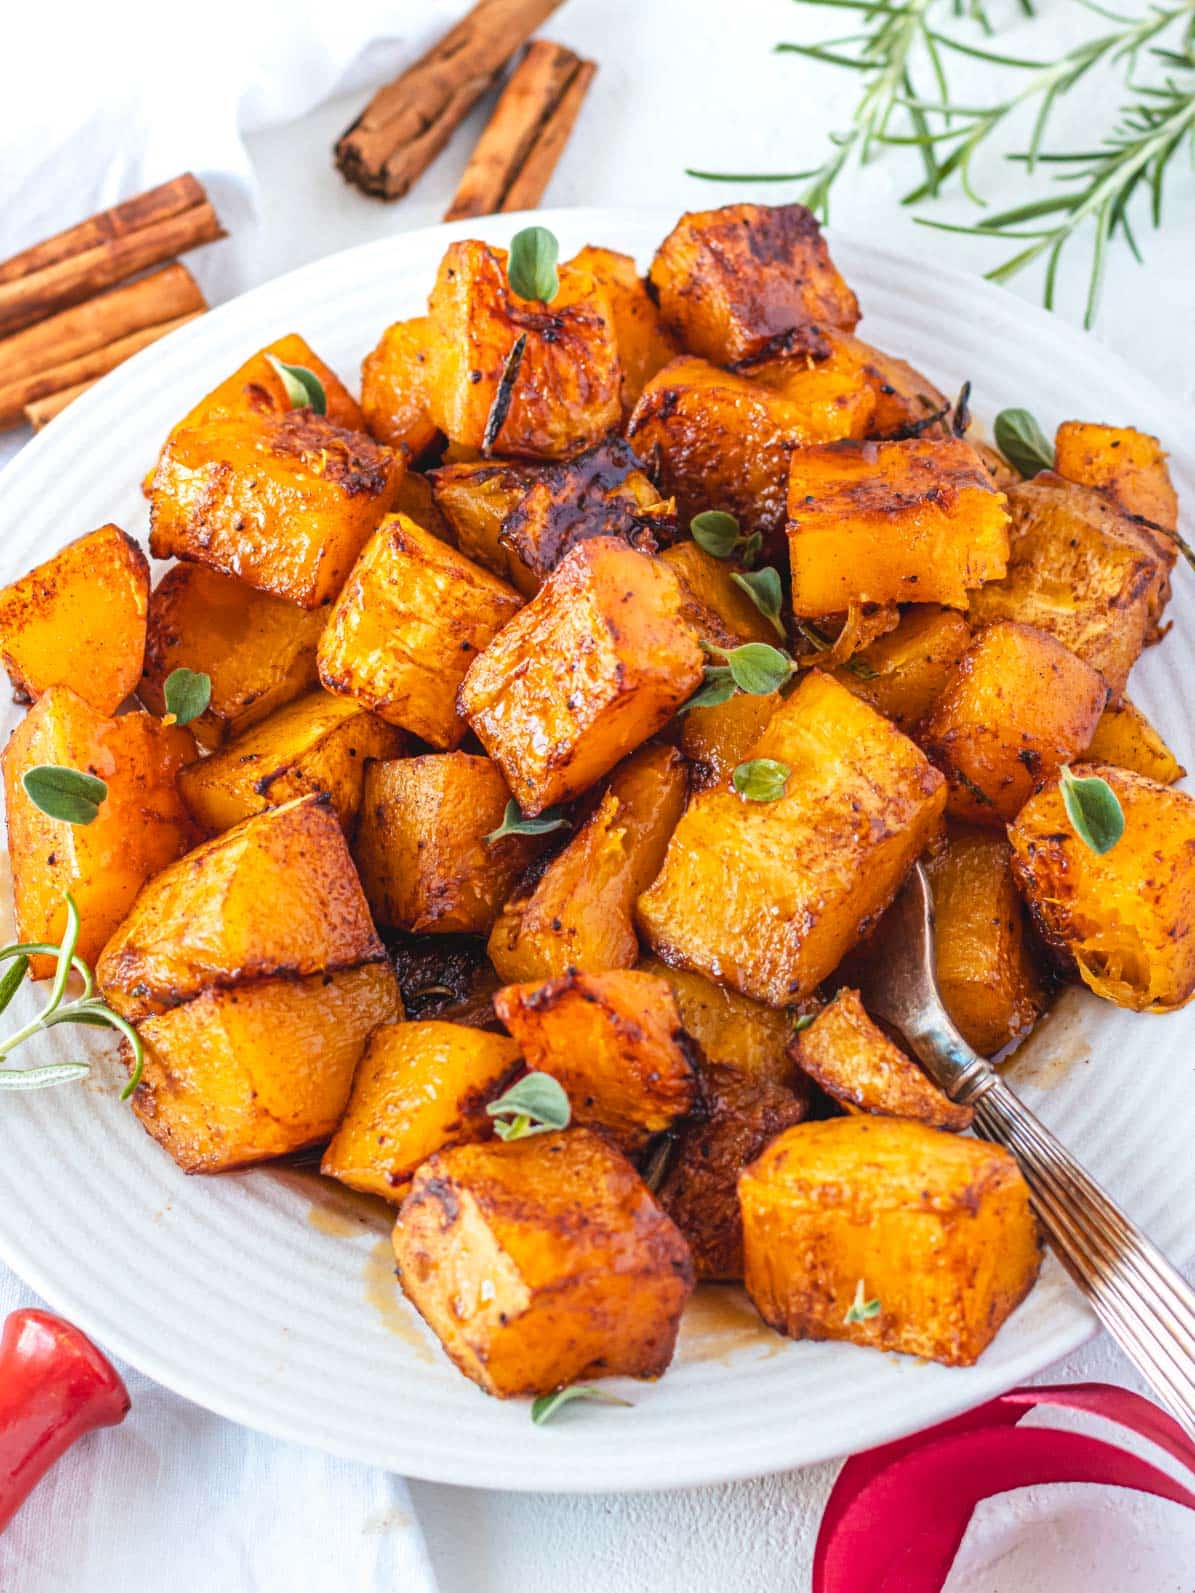 Roasted butternut squash cubes on a plate